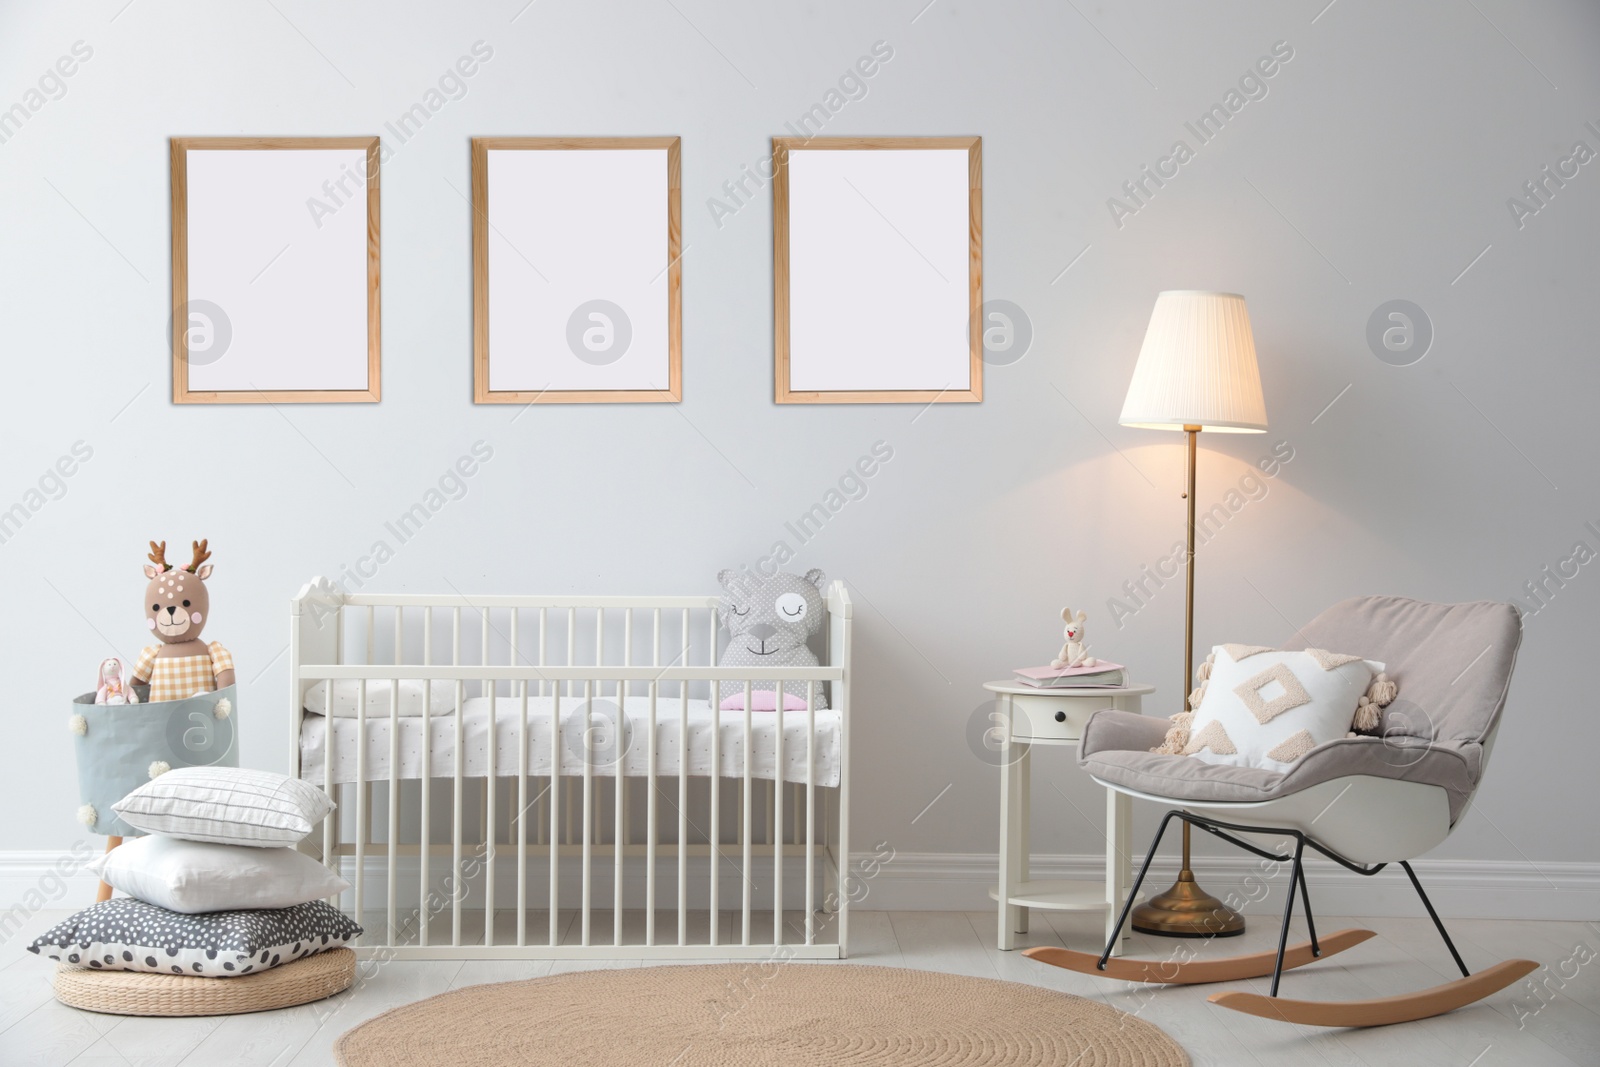 Image of Stylish nursery interior with empty posters on wall. Mockup for design